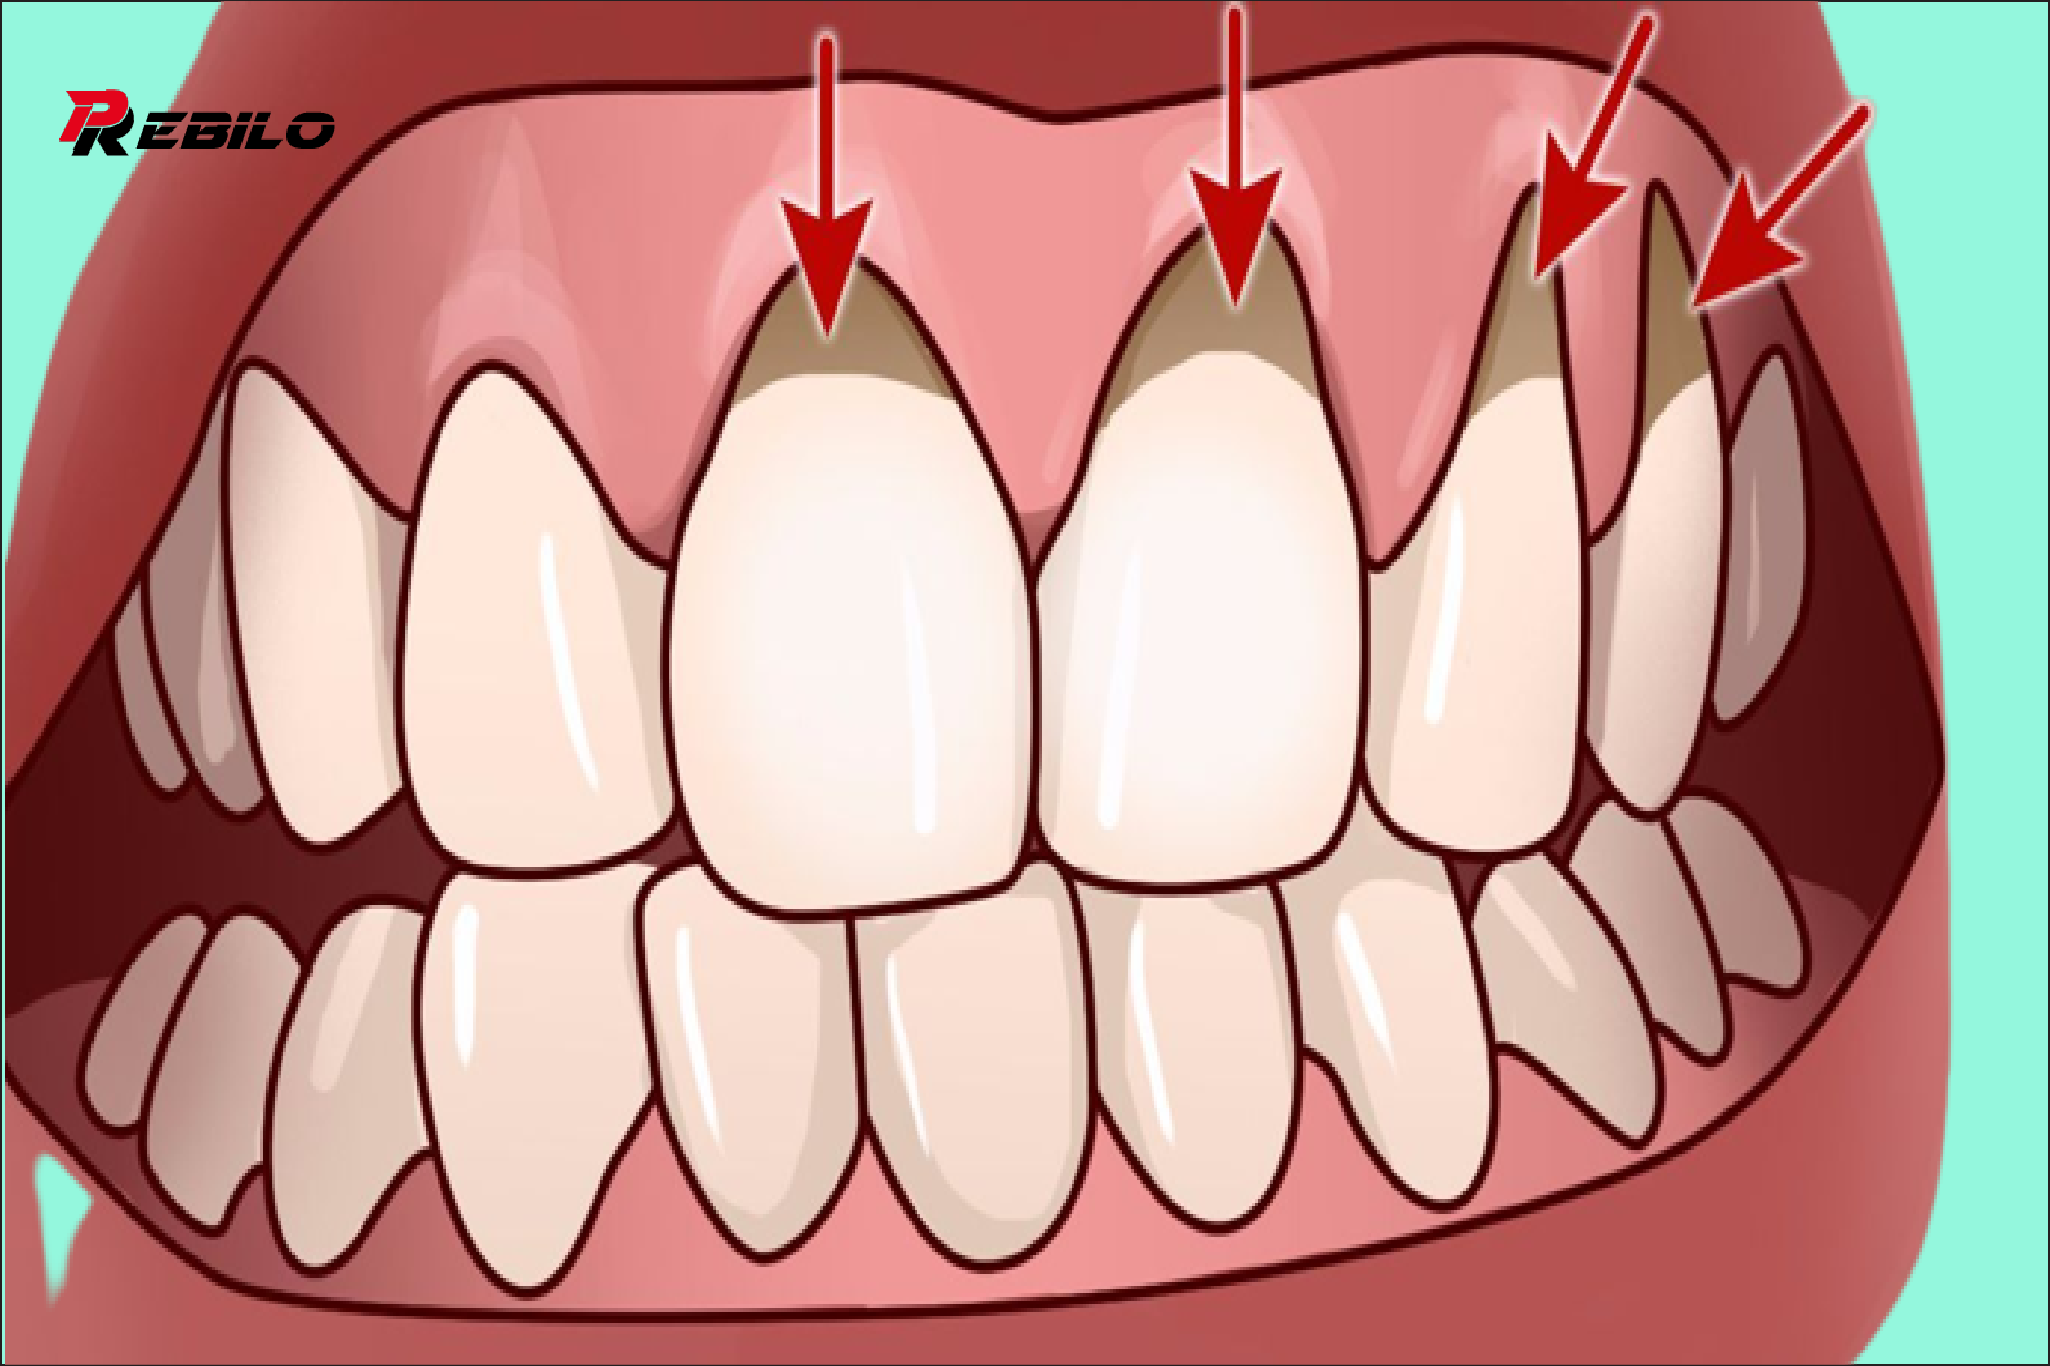 10 easy ways to treat receding gums naturally!